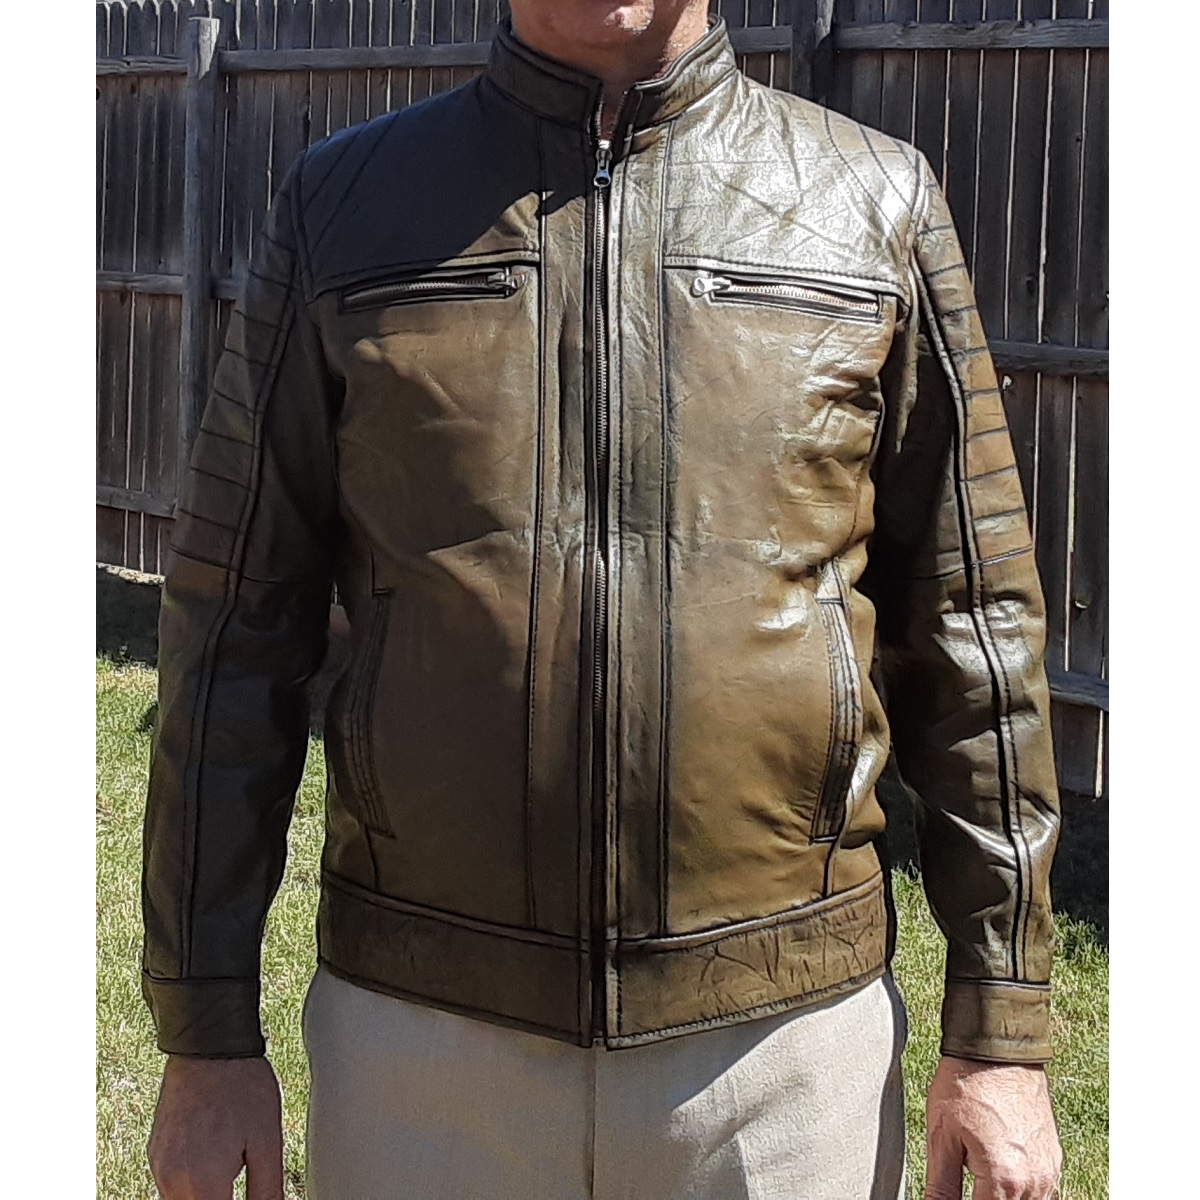 Genuine Leather Bomber Jacket for Men Oil Can Distressed Look - Soft Lambskin Jacket for men